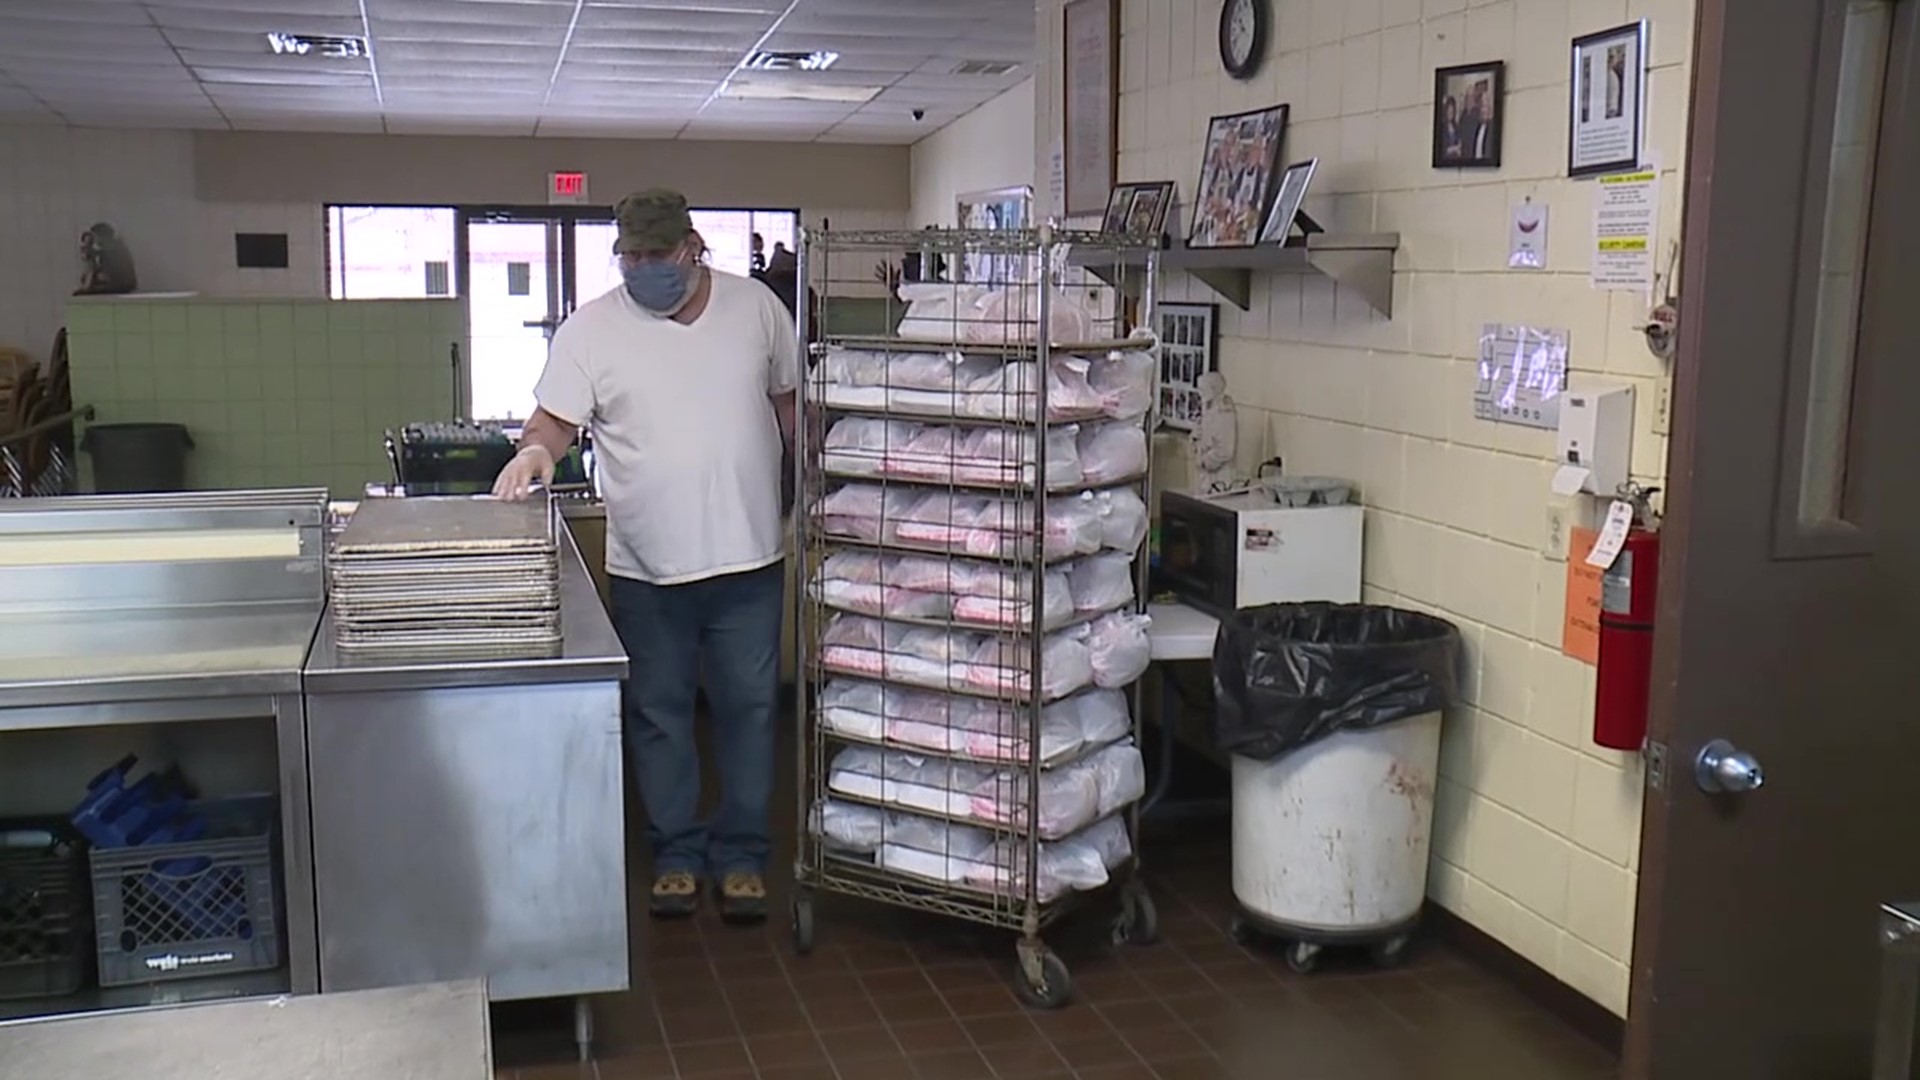 The veterans say they know what it's like to need help, so they were happy to step in to make sure St. Francis of Assisi kitchen still served its daily meal.